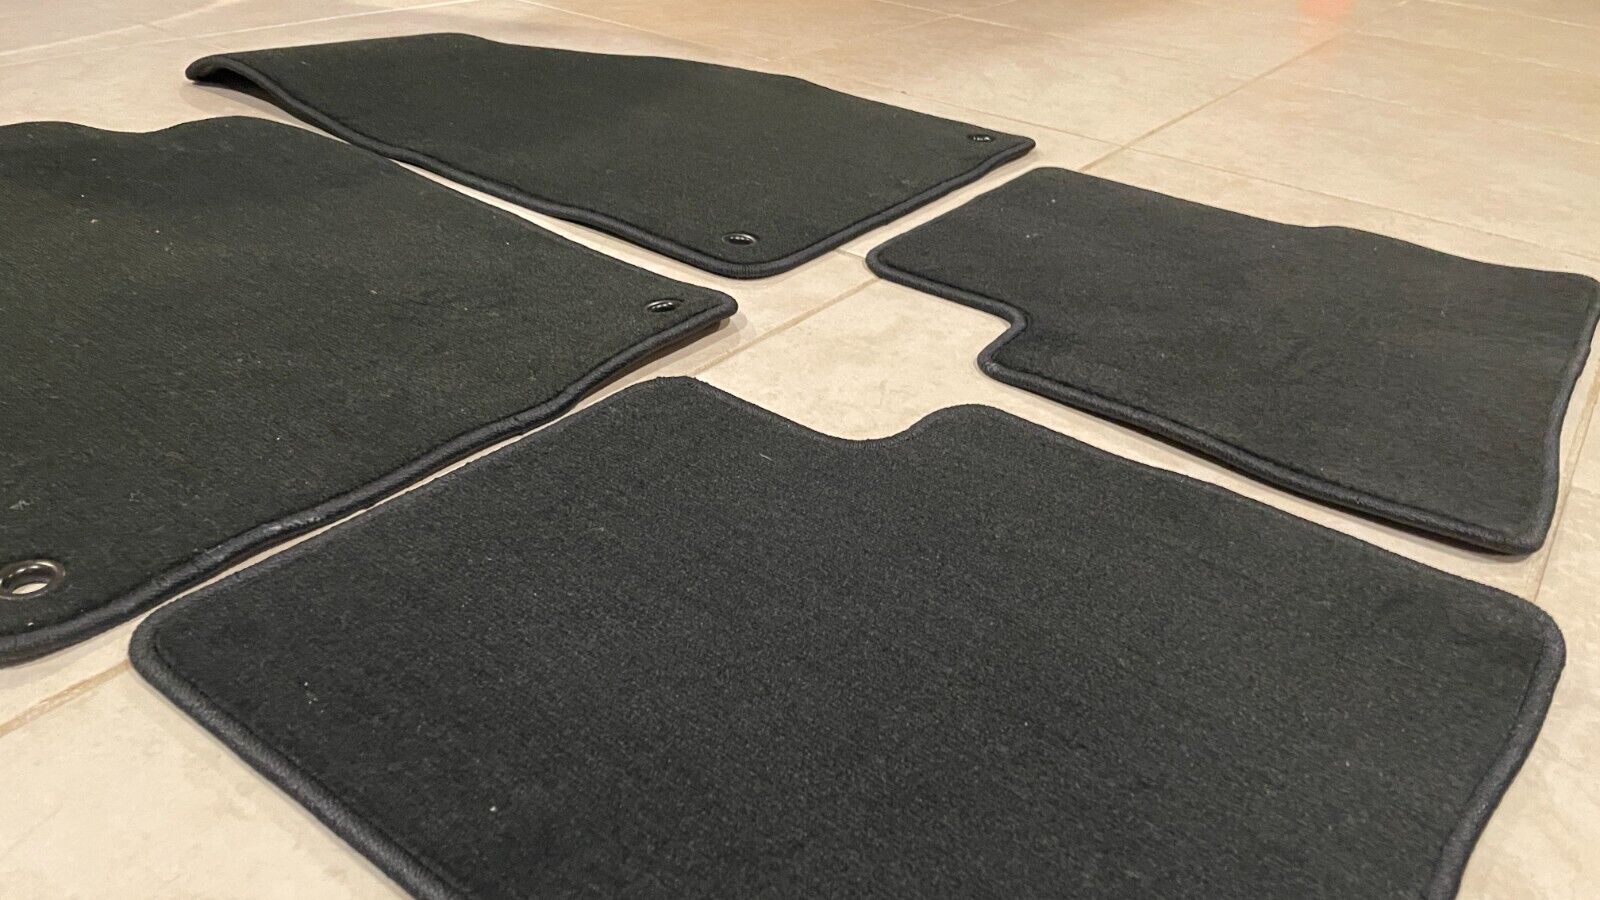 OEM Dodge Dart (PF) Carpeted Floor Mats - Whole Set - Never Used, New Condition